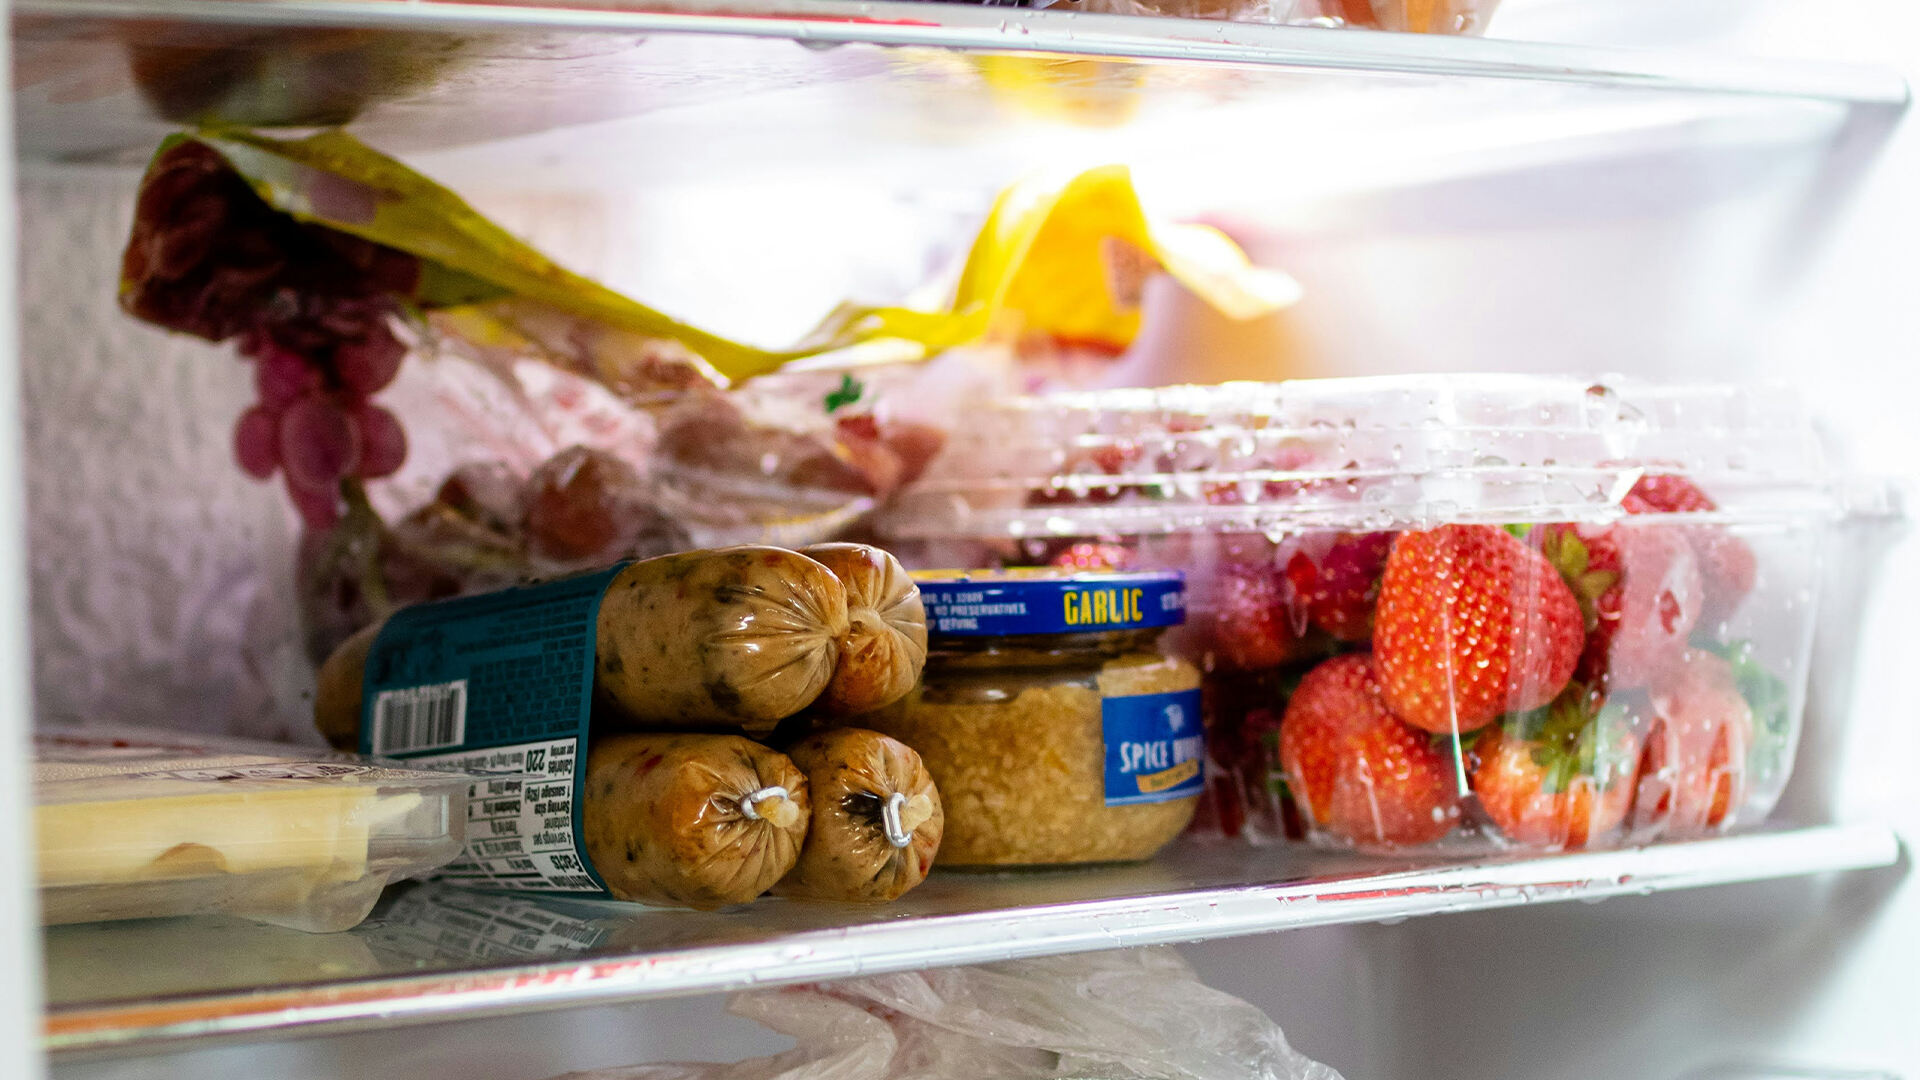 How Refrigeration Equipment Can Help Reduce Food Waste And Improve Food Safety